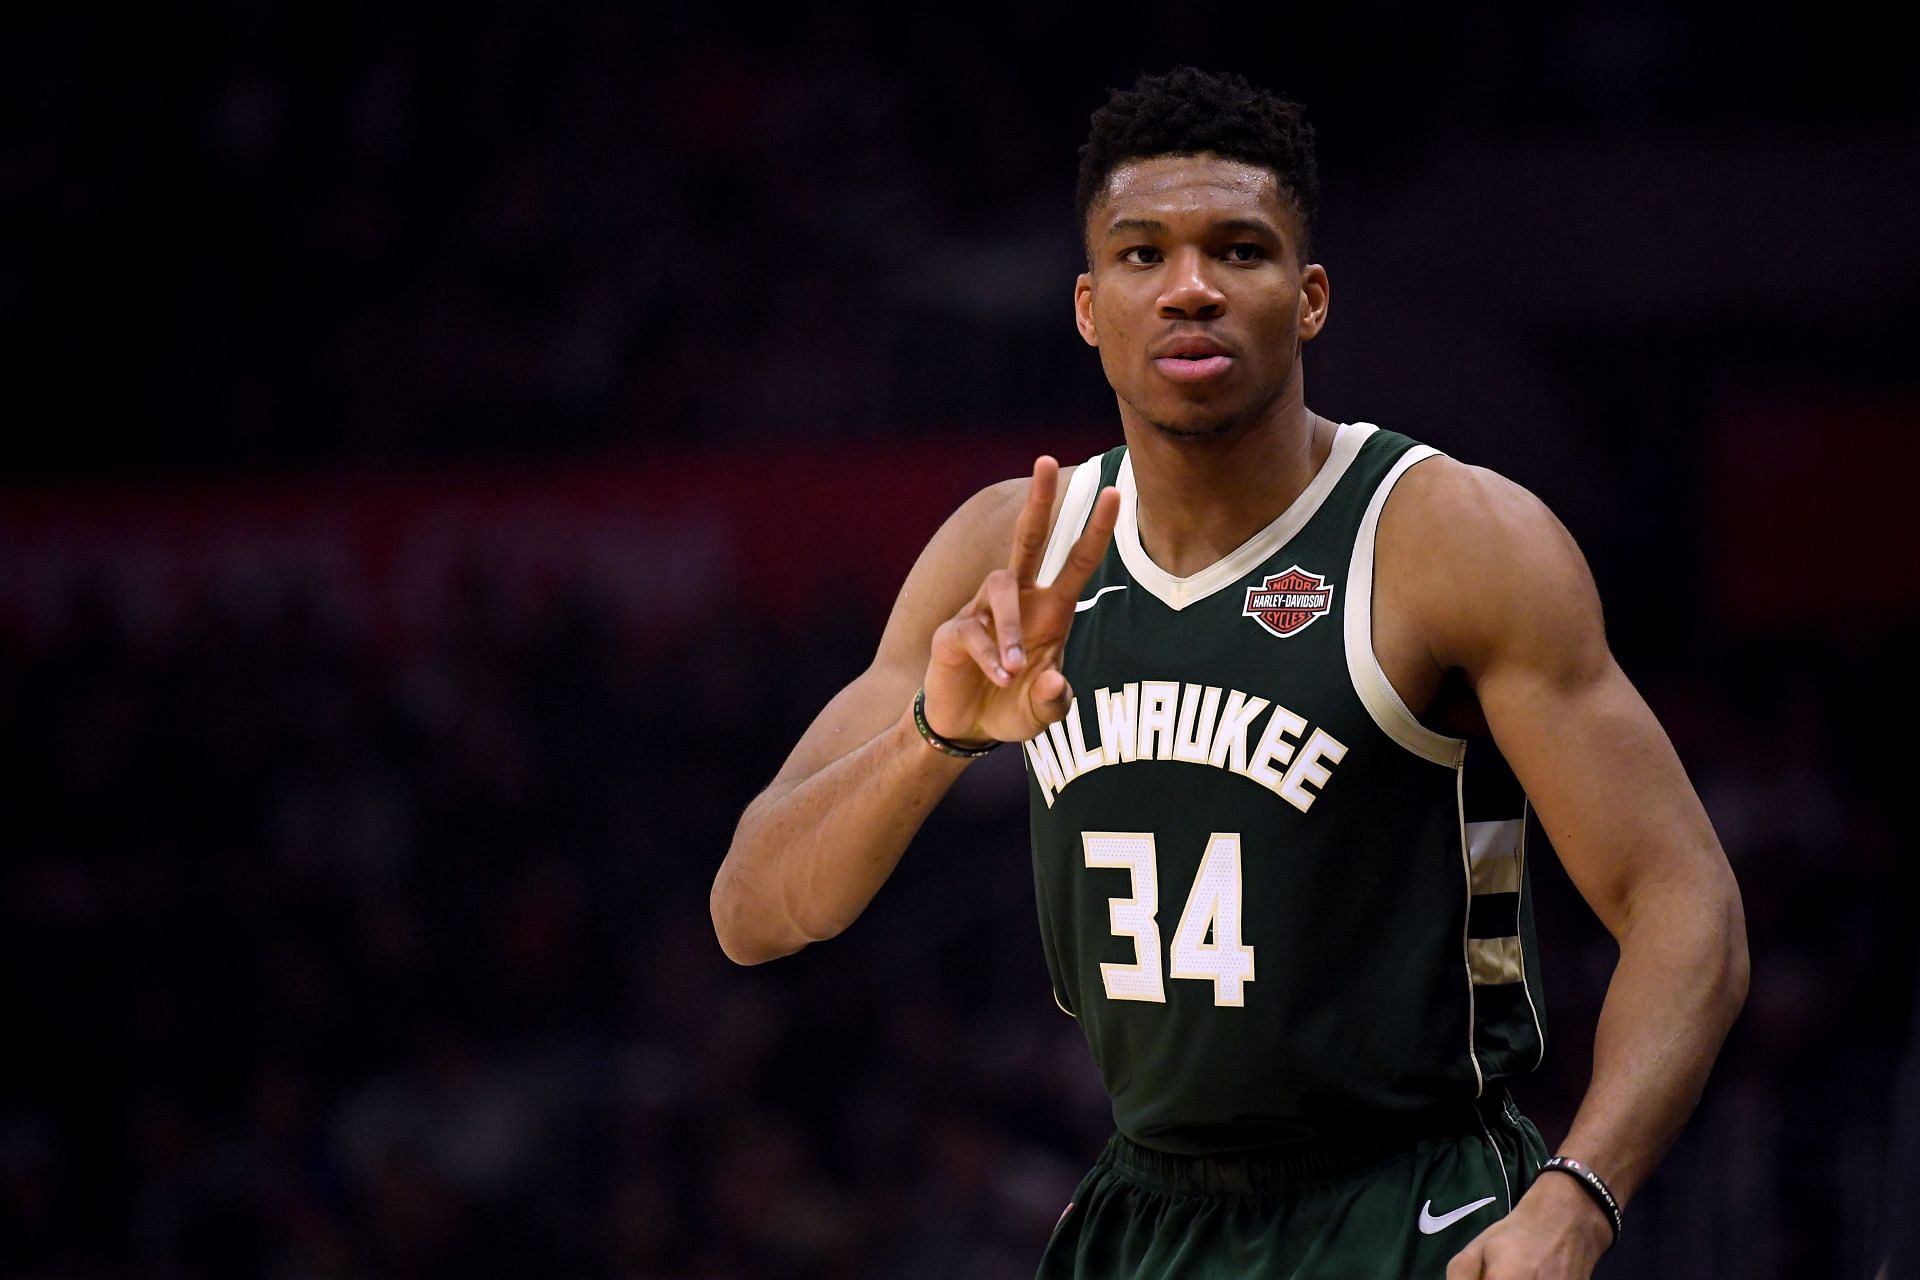 Giannis Antetokounmpo in a game against the Los Angeles Clippers